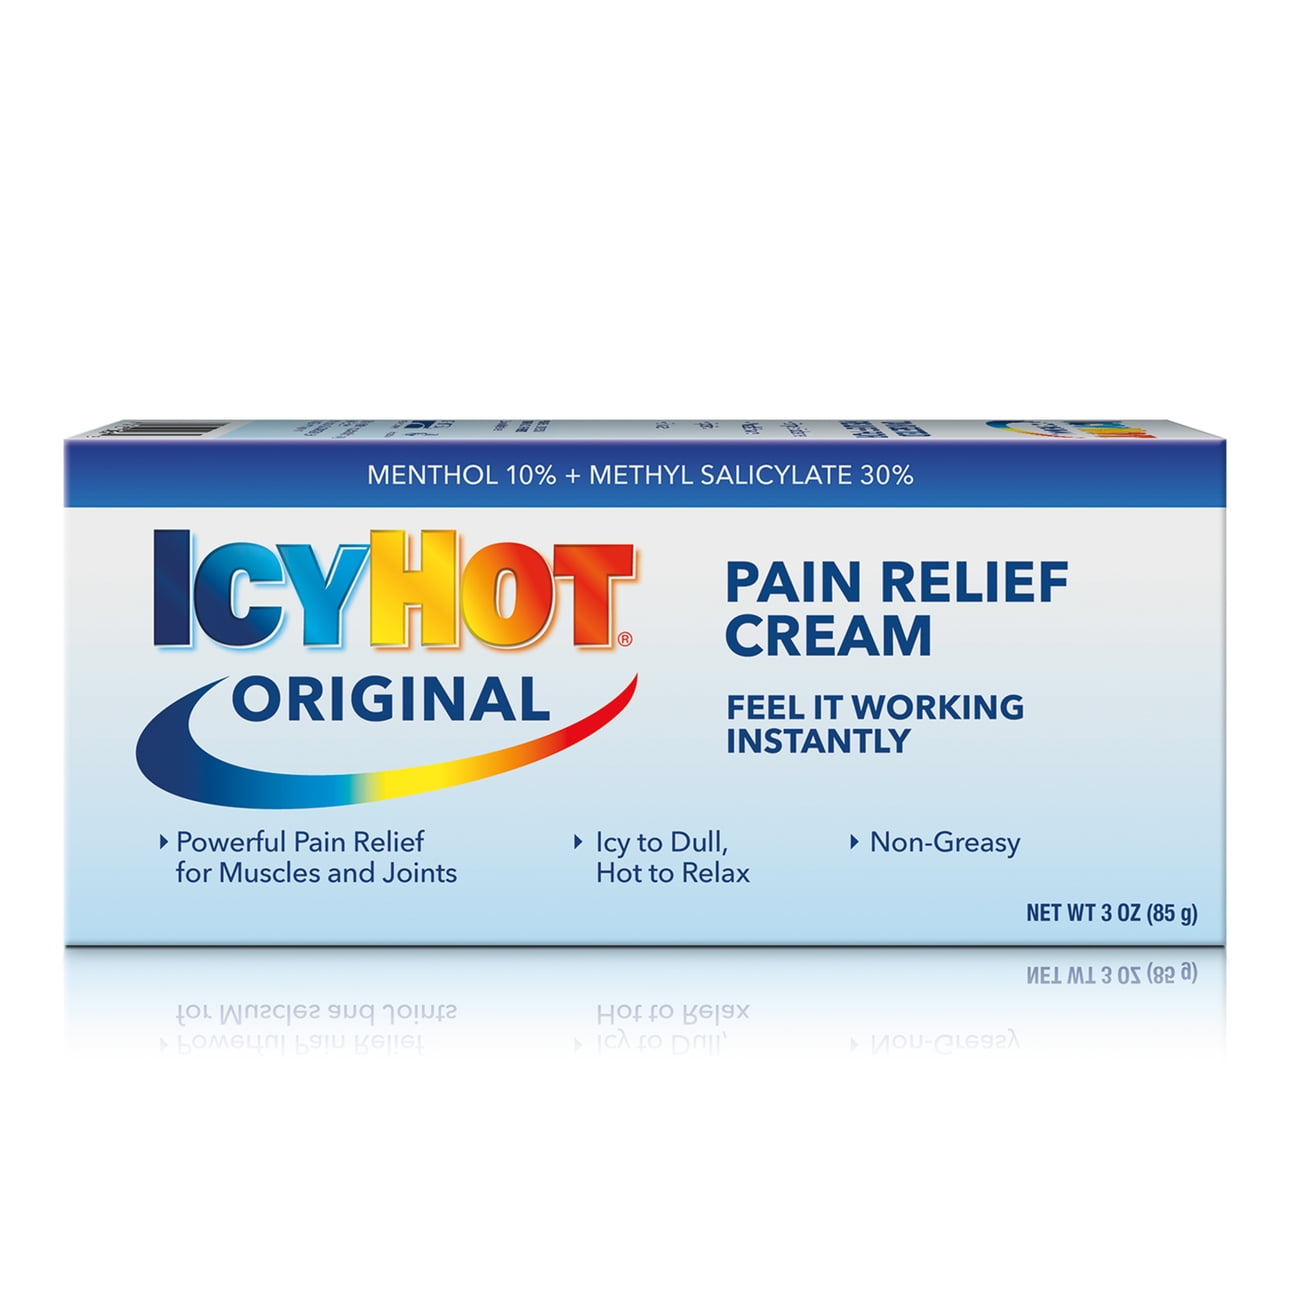 Icy Hot Orignal Pain Relieving Cream 3 oz. Powerful Pain Relief for Muscles & Joints